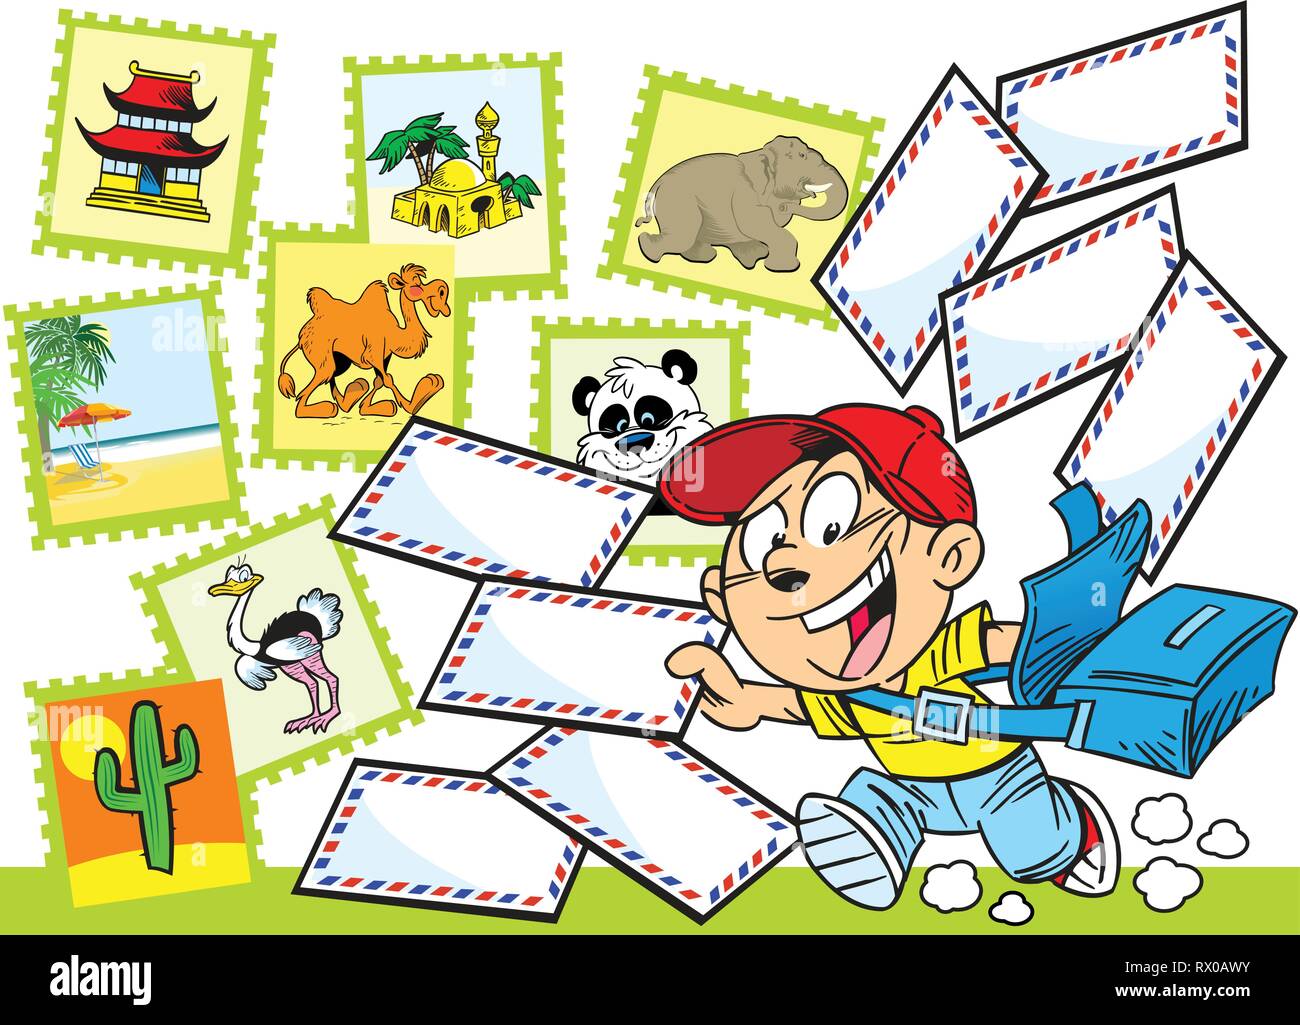 The illustration shows the boy postman who delivers letters. Illustration done in cartoon style. Stock Vector